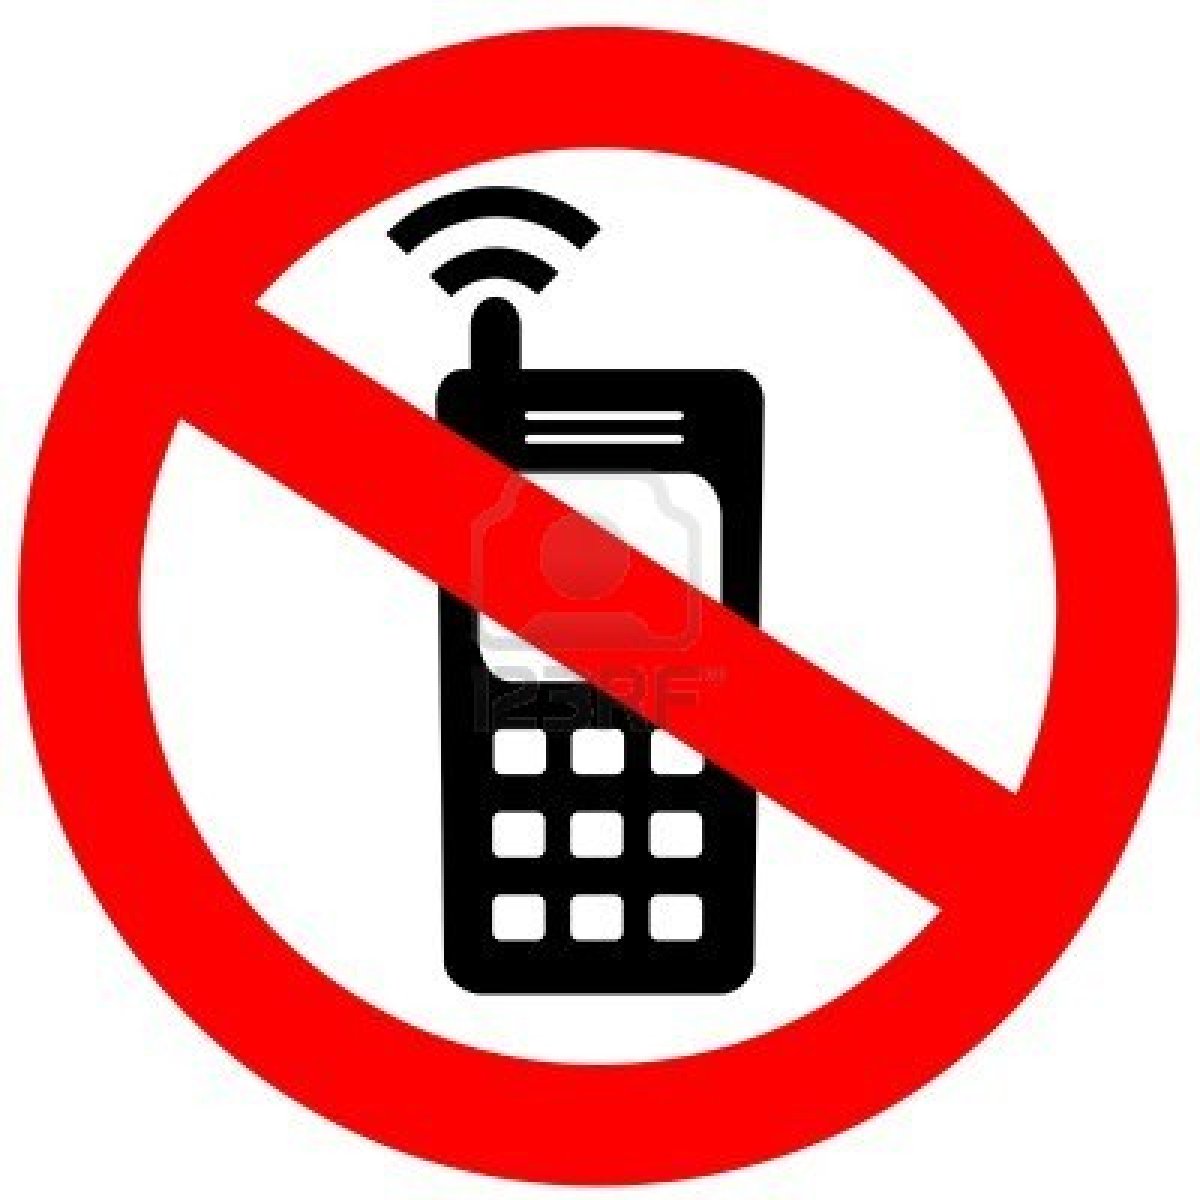 7014829-no-cell-phone-sign